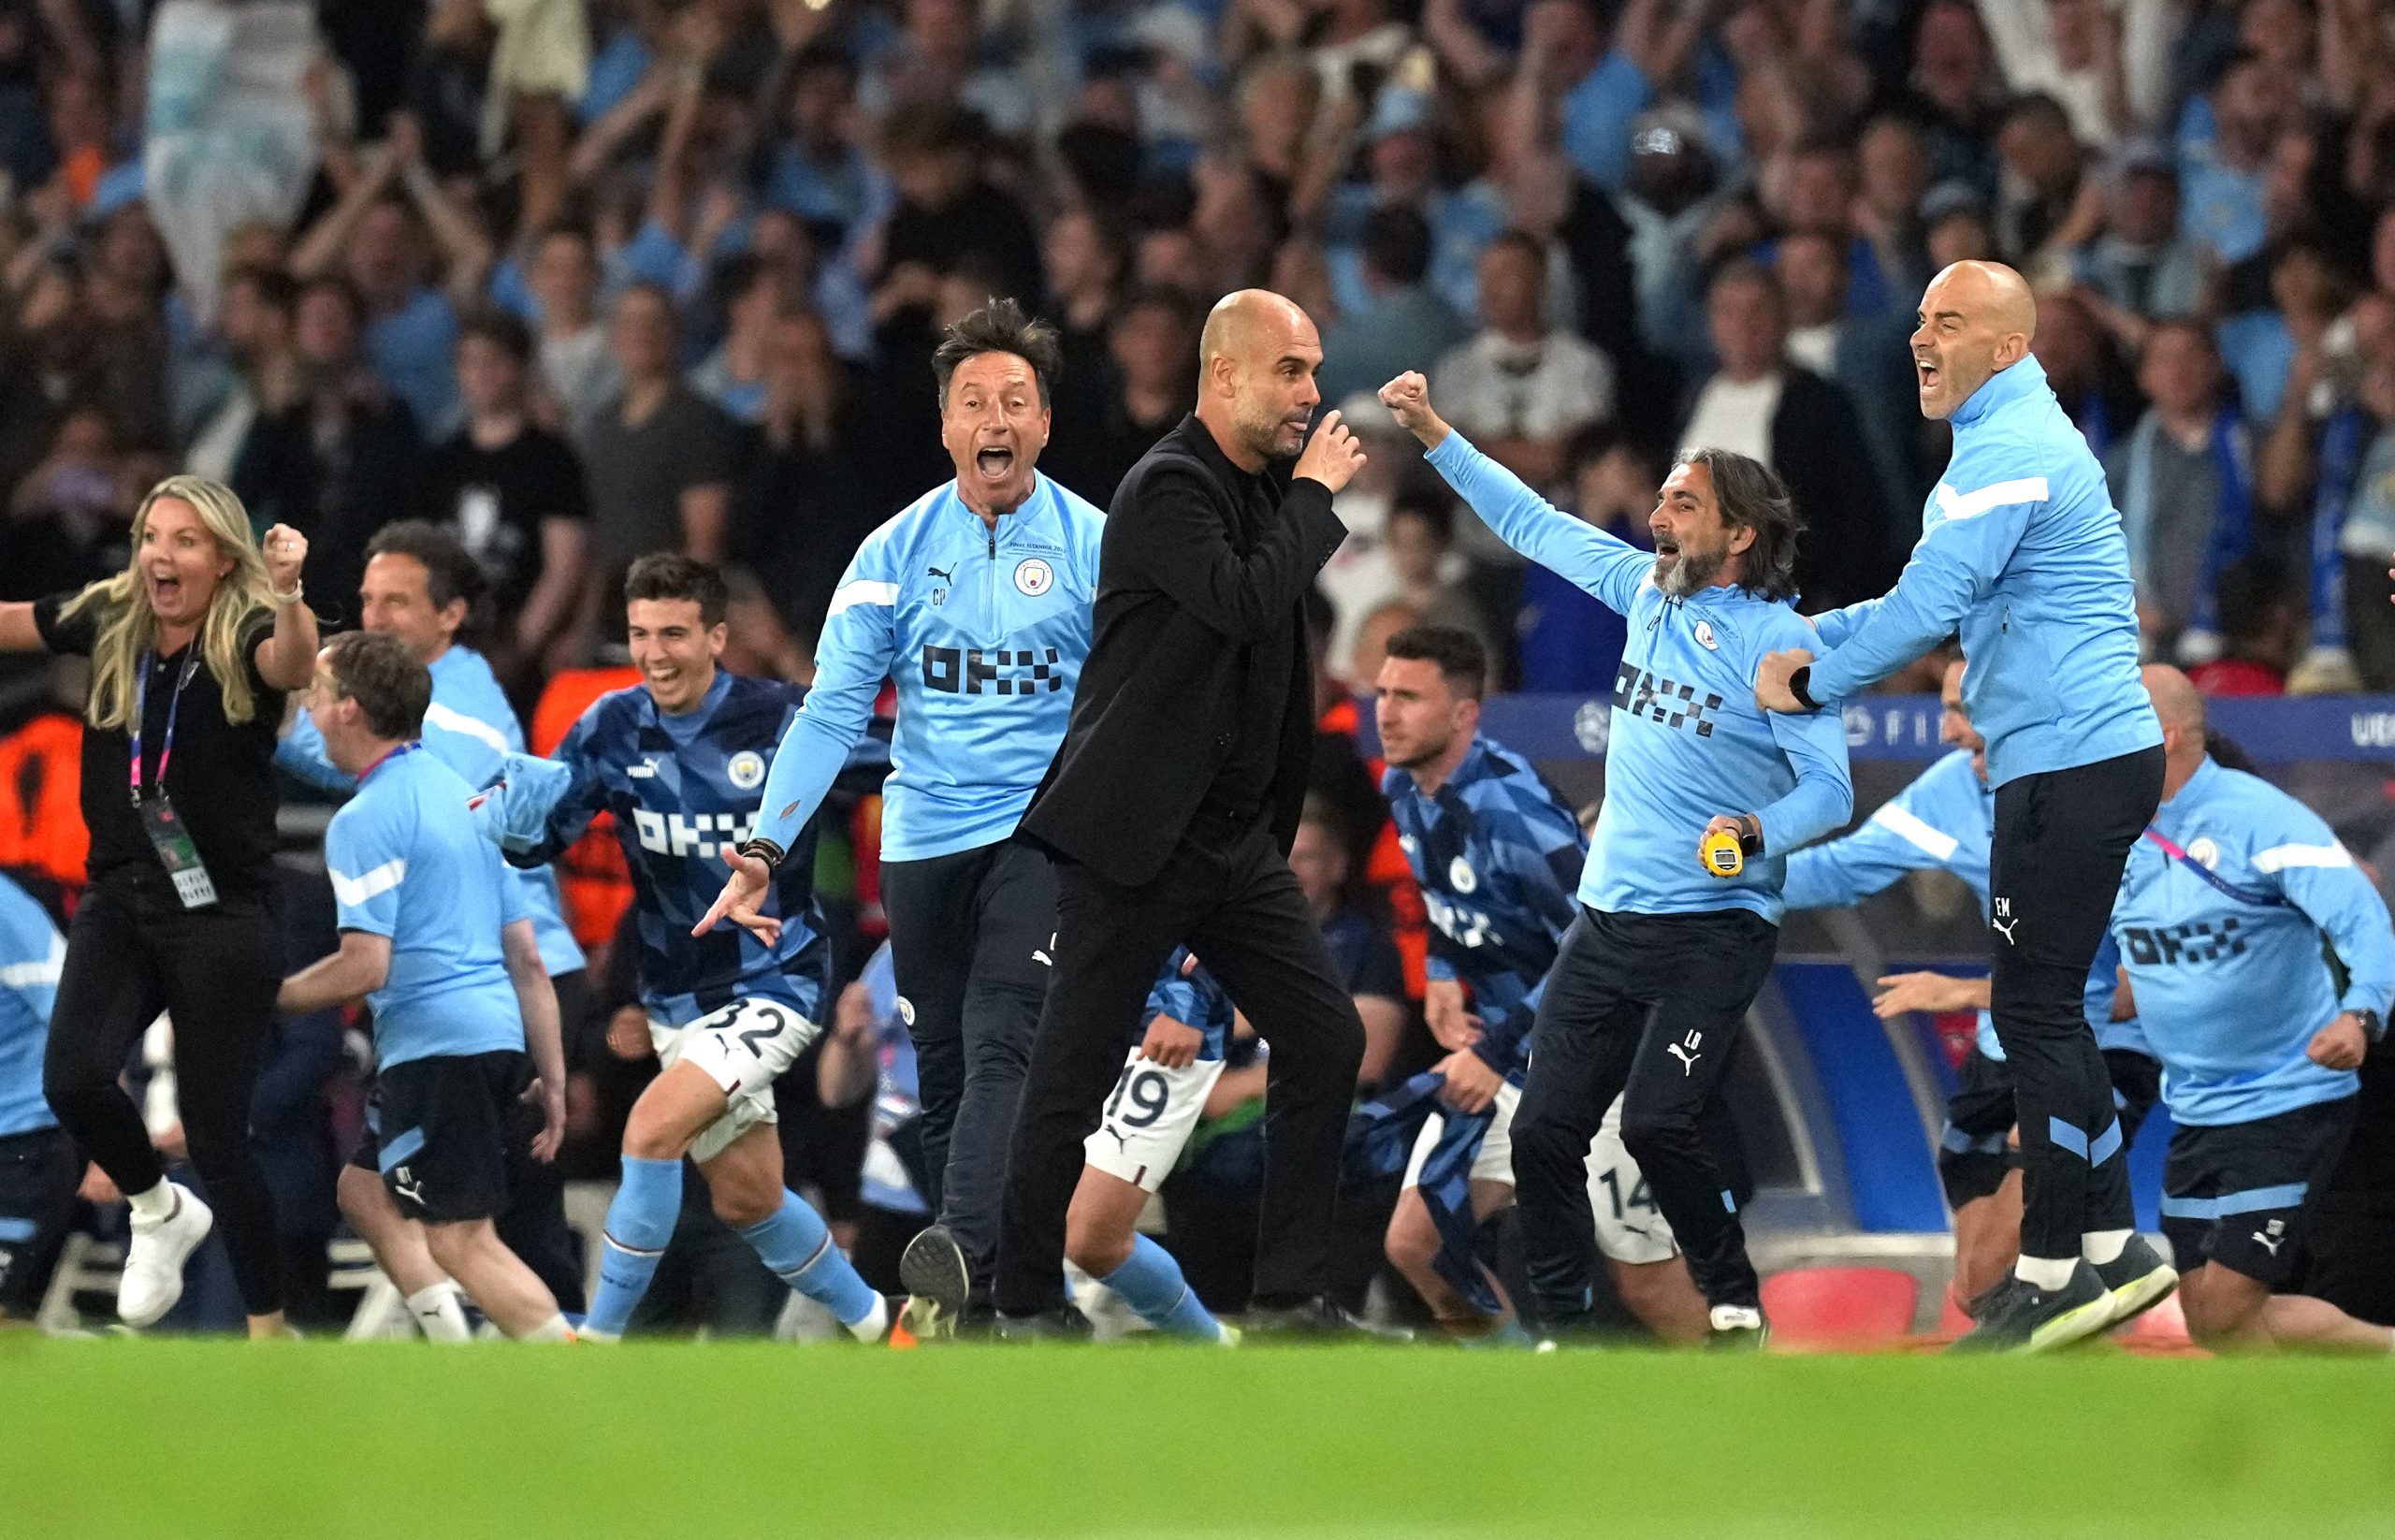 The key games that brought Manchester City a treble